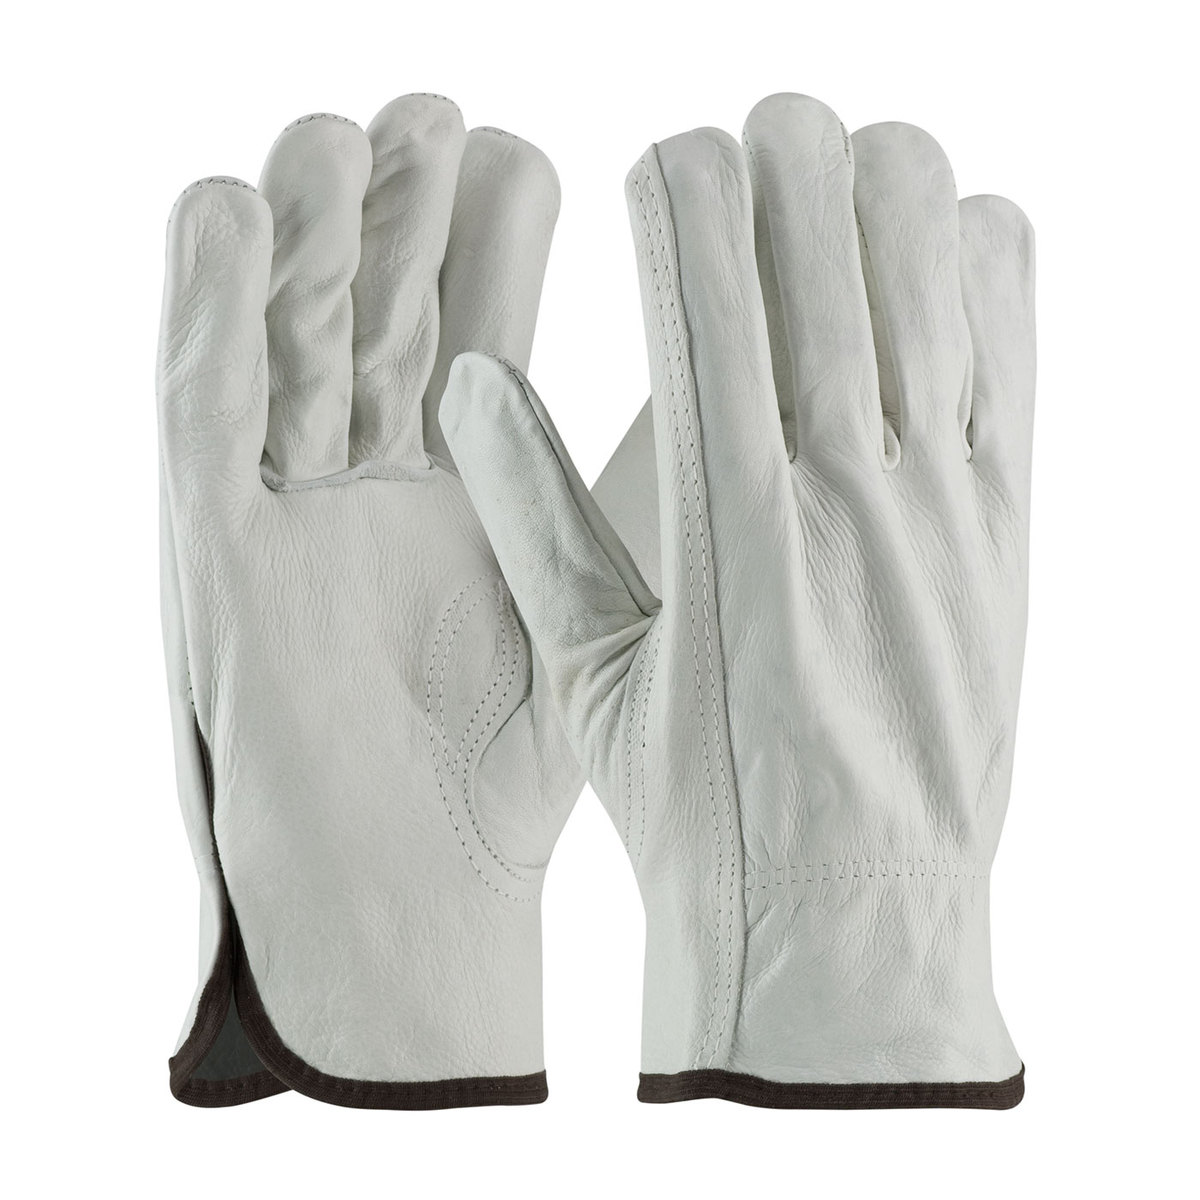 PIP® X-Large Natural Top Grain Cowhide Unlined Drivers Gloves